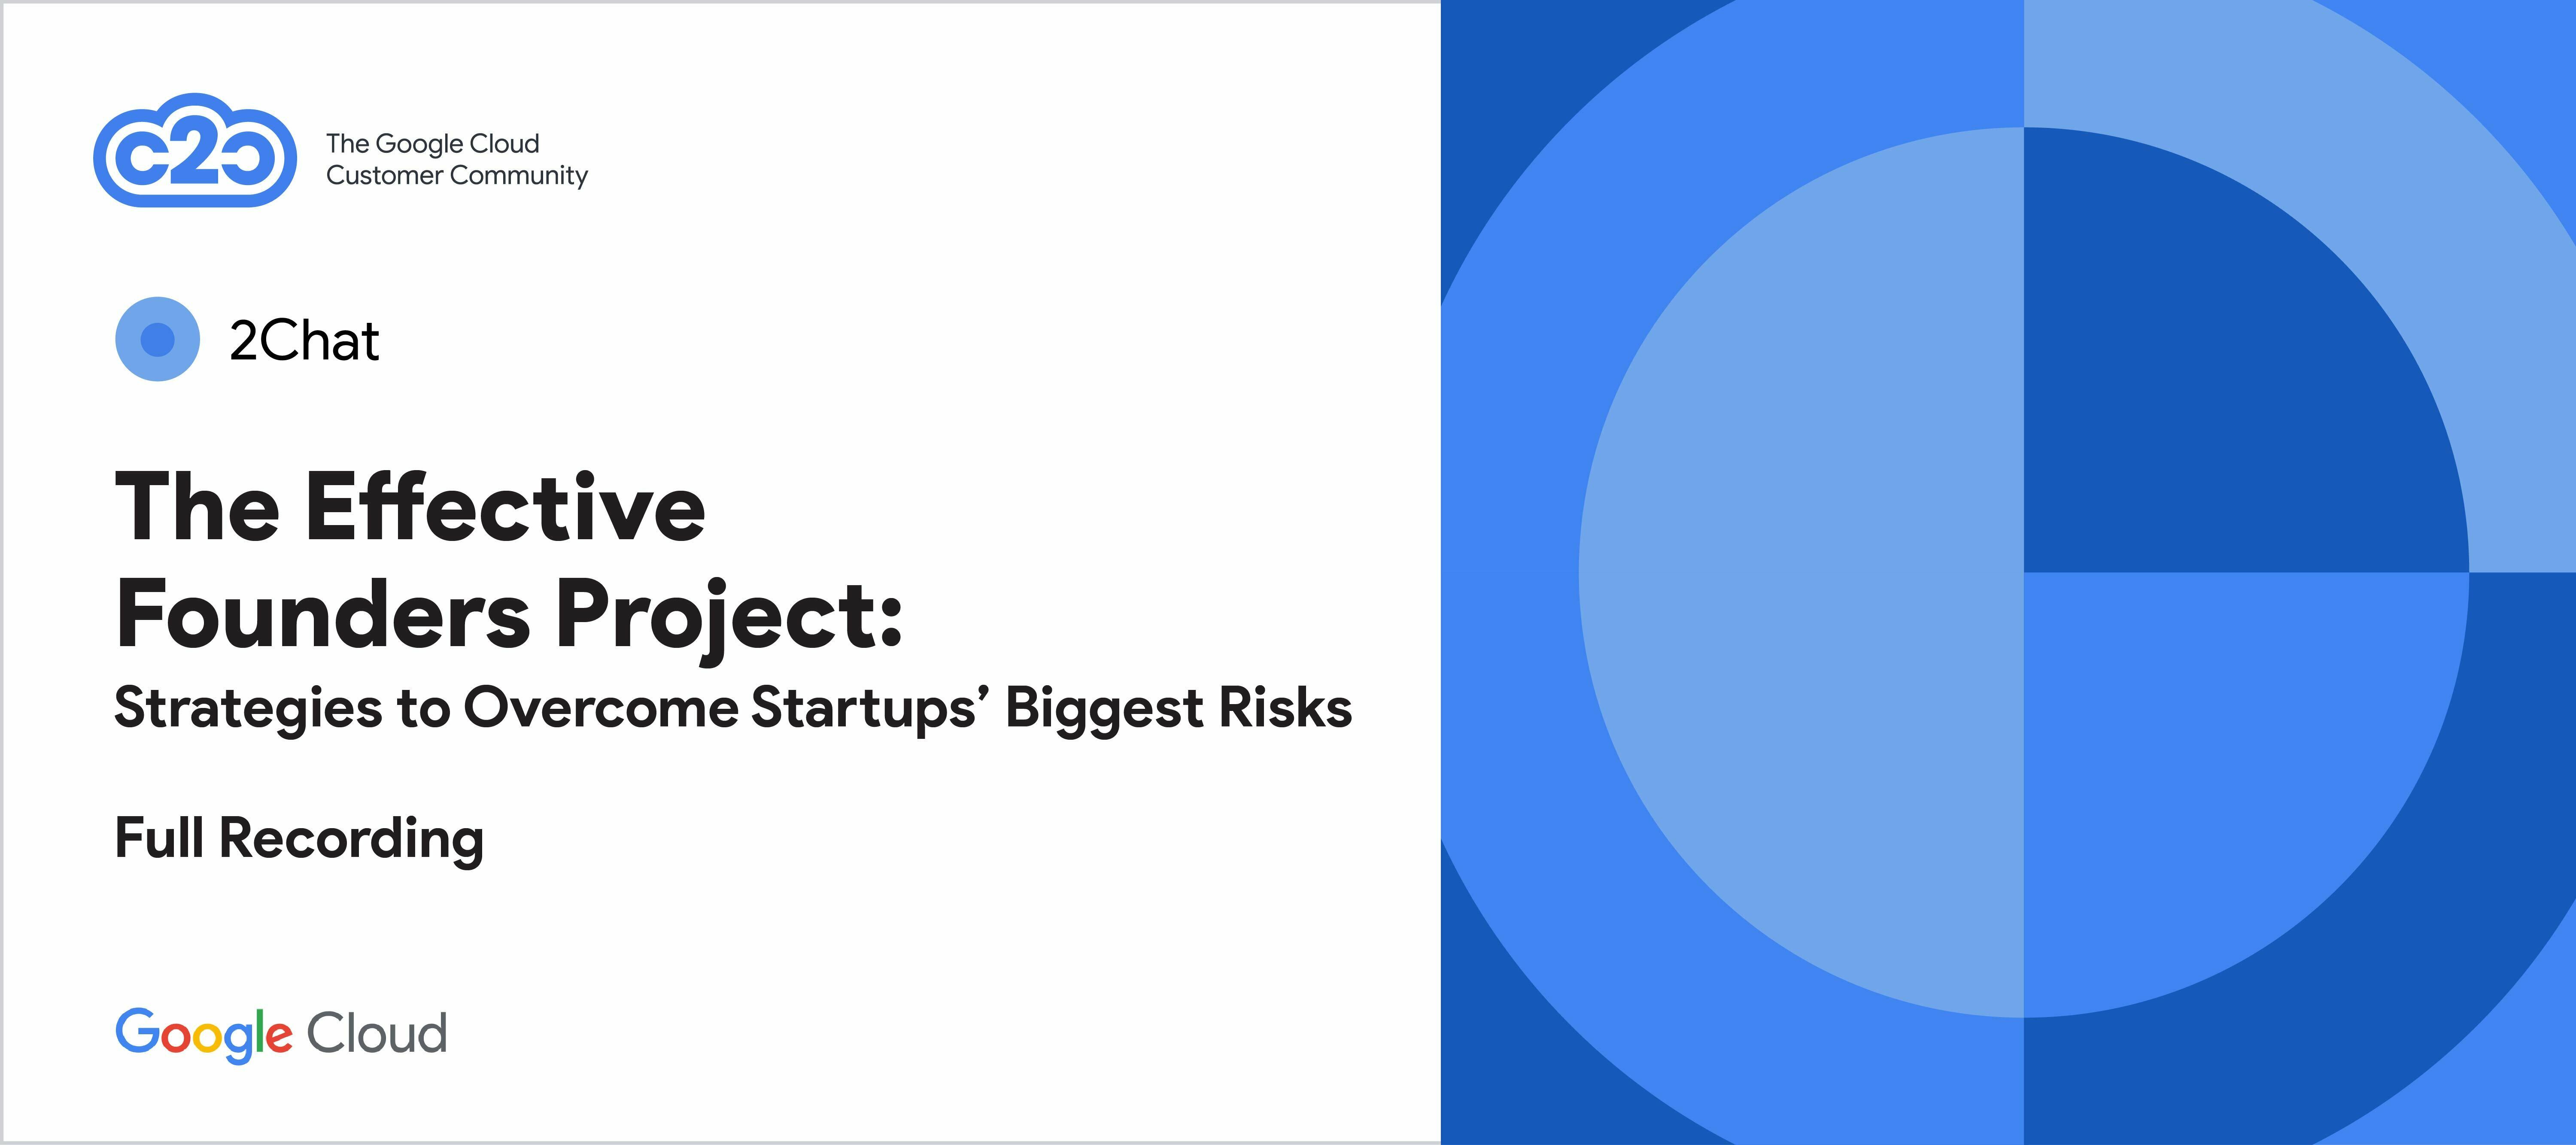 C2C 2Chat: The Effective Founder’s Project: Strategies to Overcome Startups’ Biggest Risks (full recording)